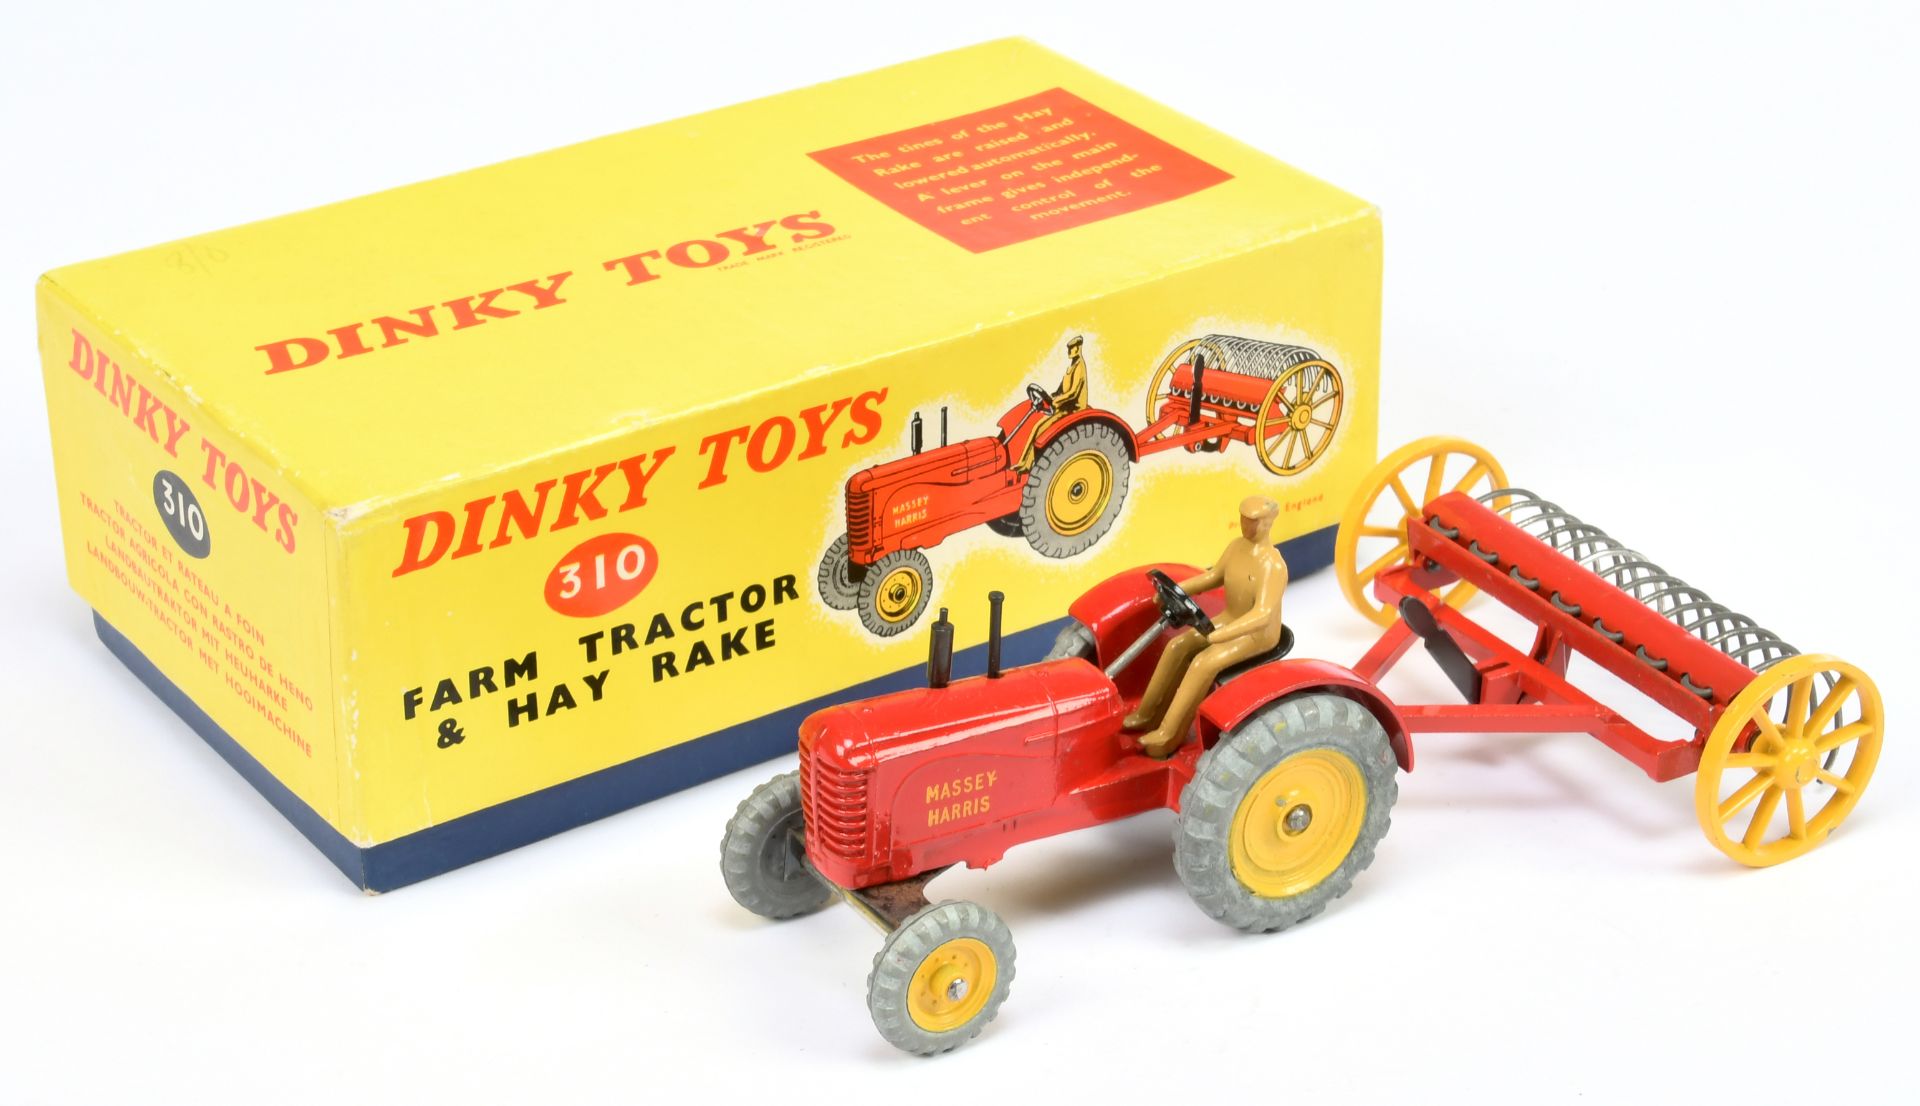 Dinky Toys 310 Farm Tractor Set - To Include Massey Harris Tractor - red body, yellow metal wheel...